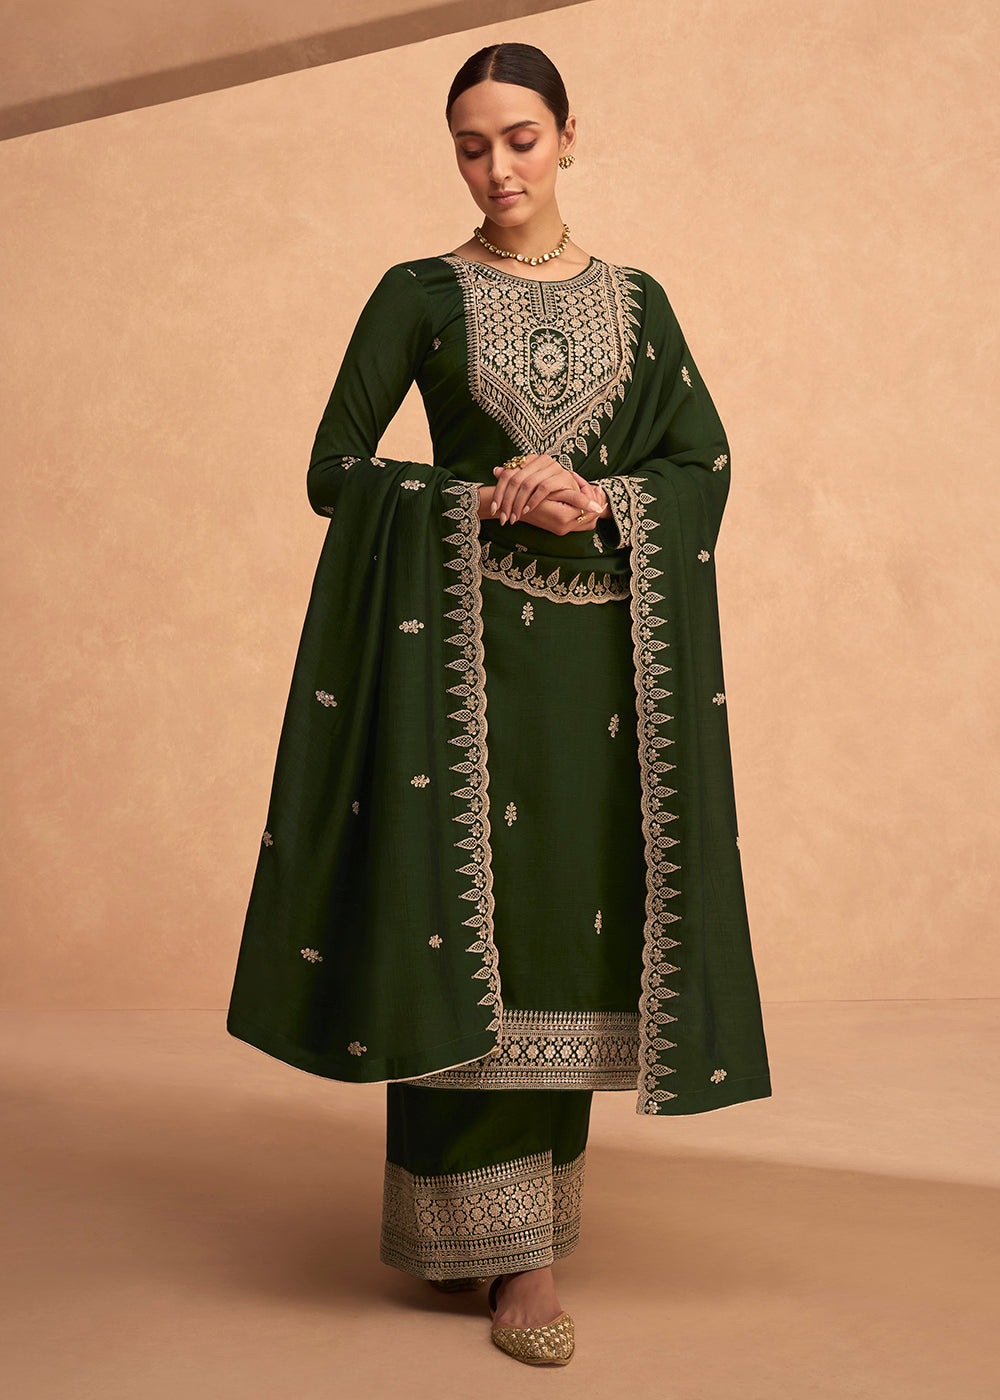 Buy Now Pretty Green Premium Silk Embroidered Indian Palazzo Salwar Suit Online in USA, UK, Canada, Germany & Worldwide at Empress Clothing.